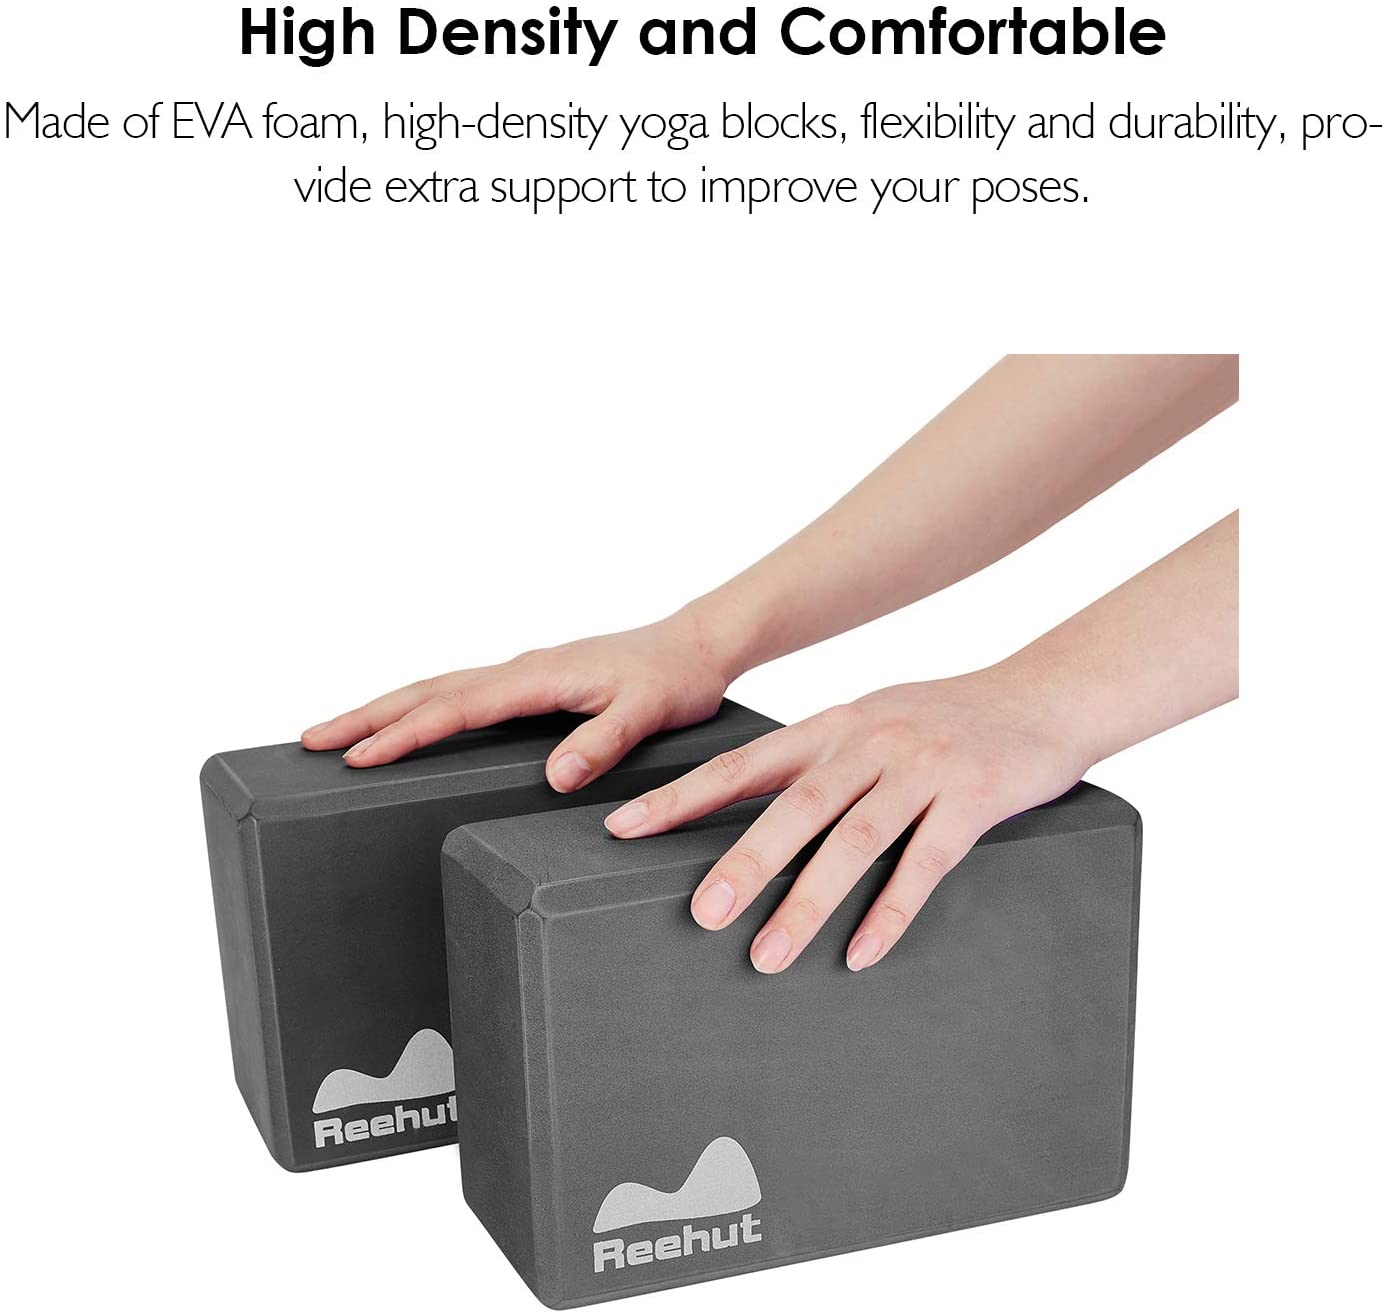 High Density EVA Foam Blocks to Support and Deepen Poses. - e4cents